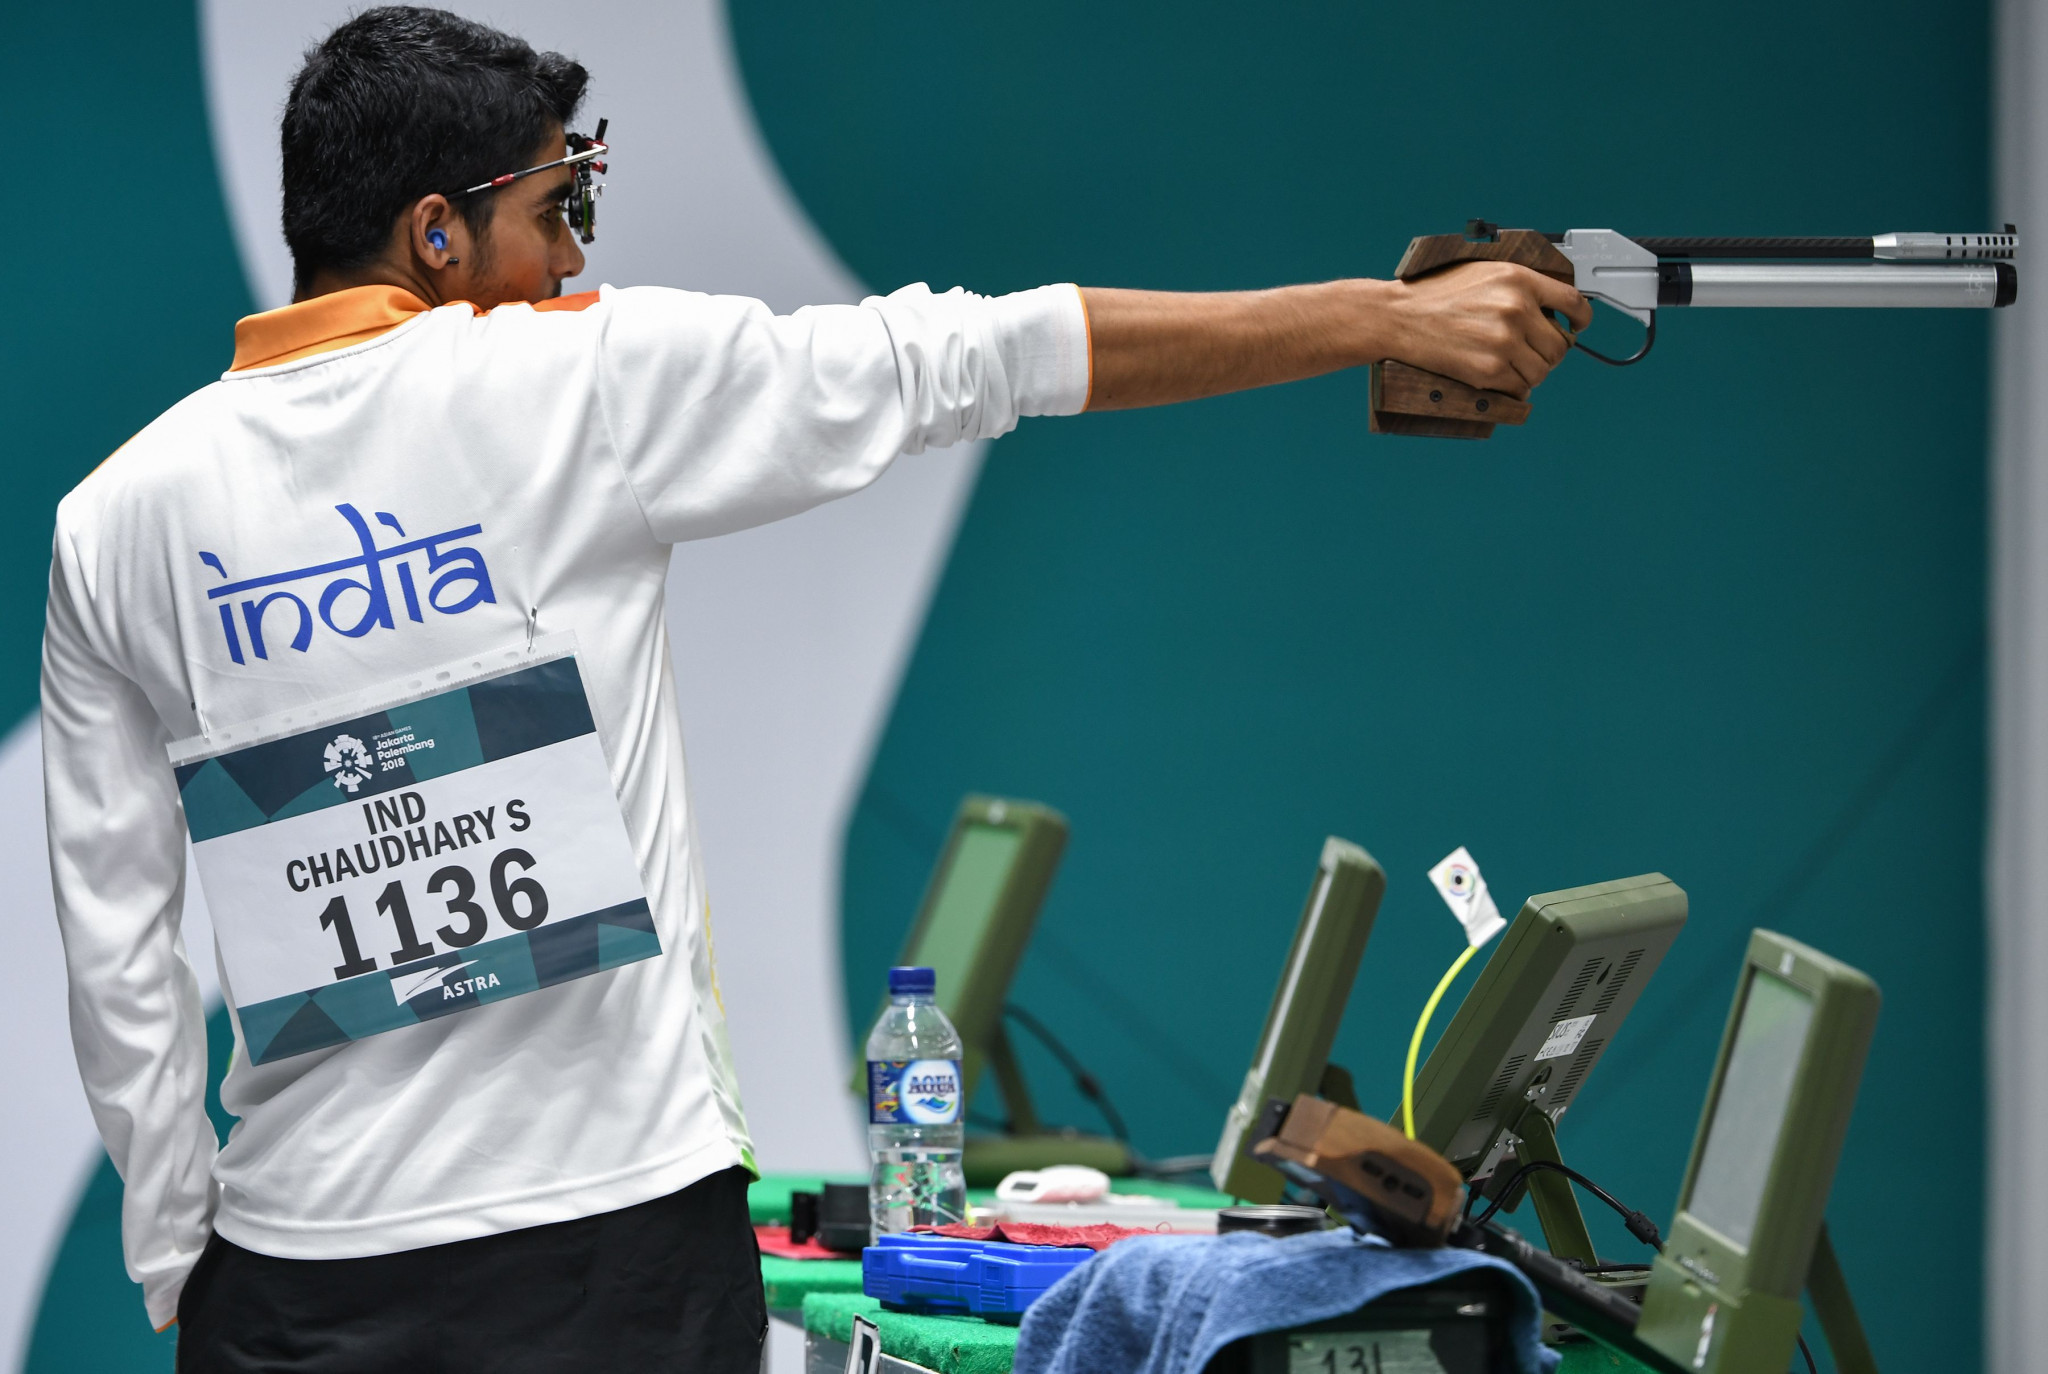 Indian teenager Saurabh Chaudhary produced a superb display to win the men's 10 metres air pistol gold medal ©Getty Images